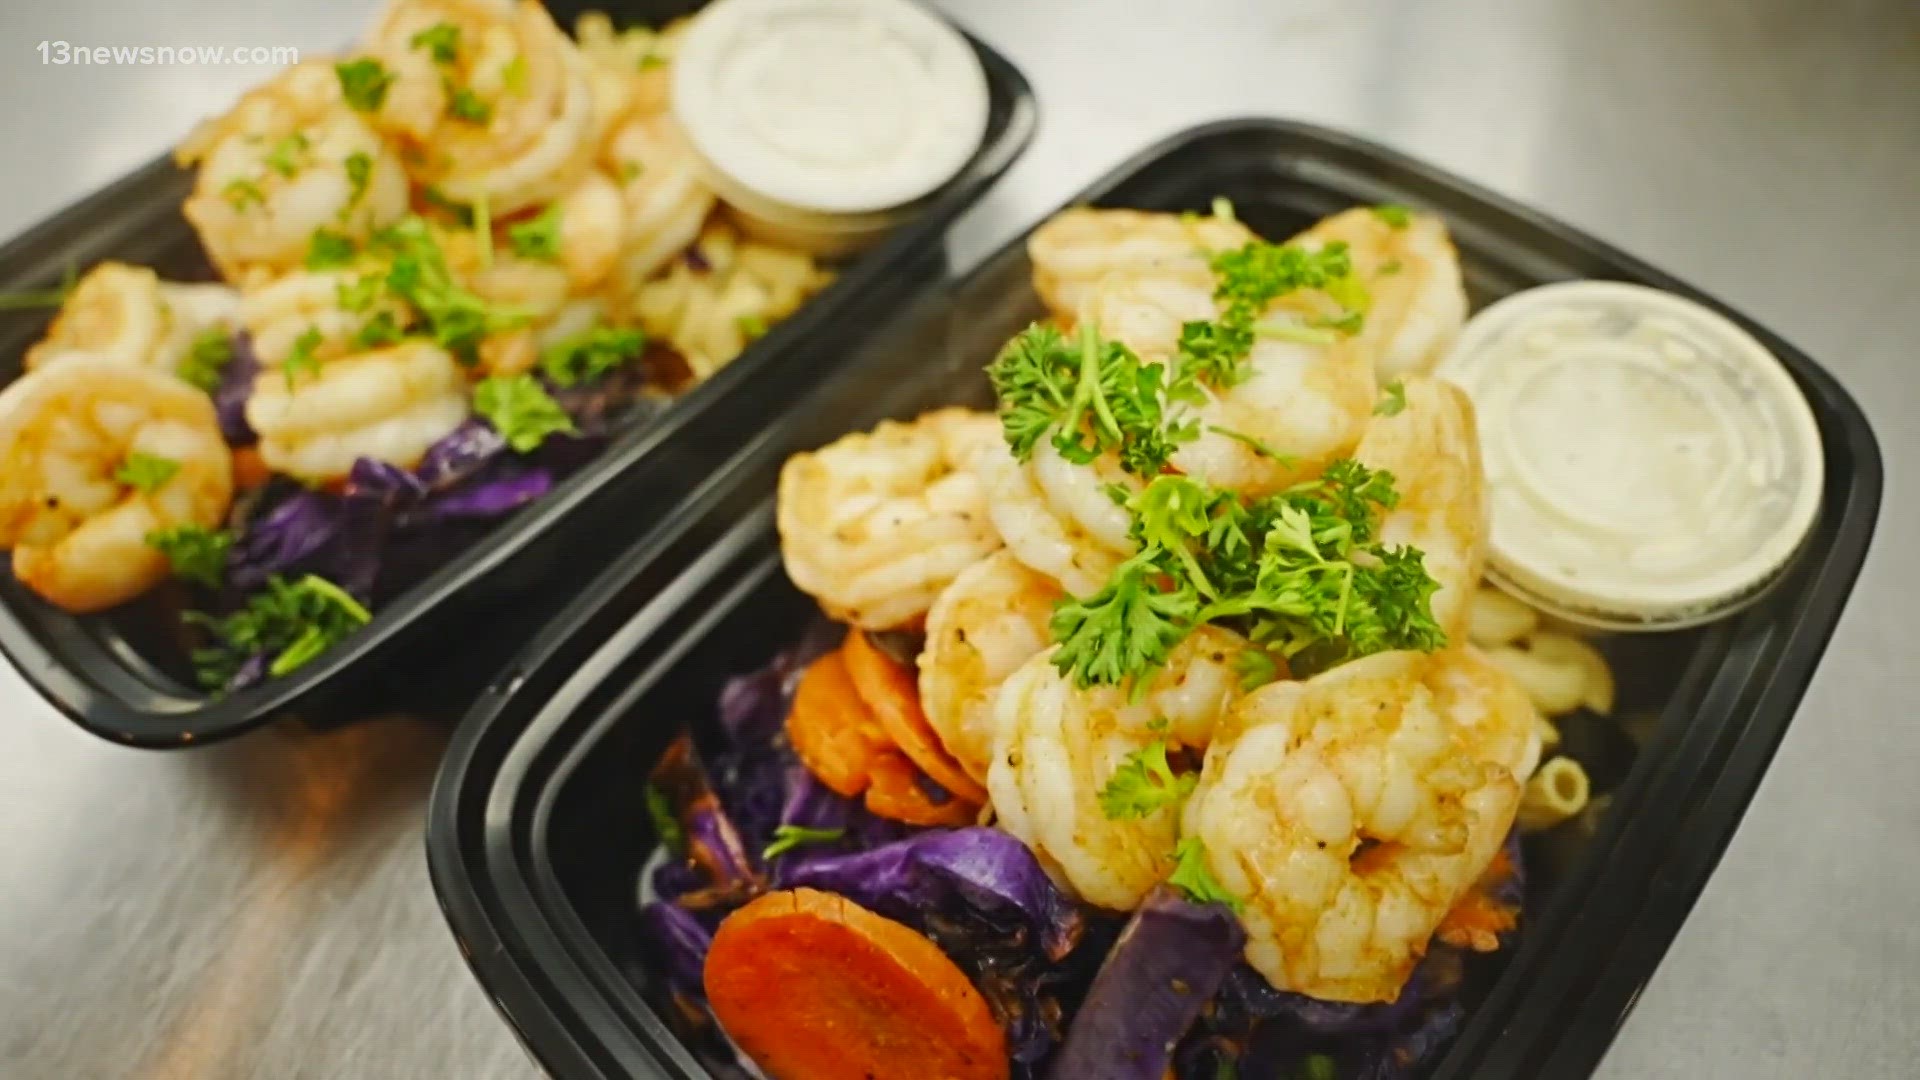 Lyfestyle Meals in Virginia Beach wants you to know that you don't have to compromise quality or flavor when planning your meals for a busy week.